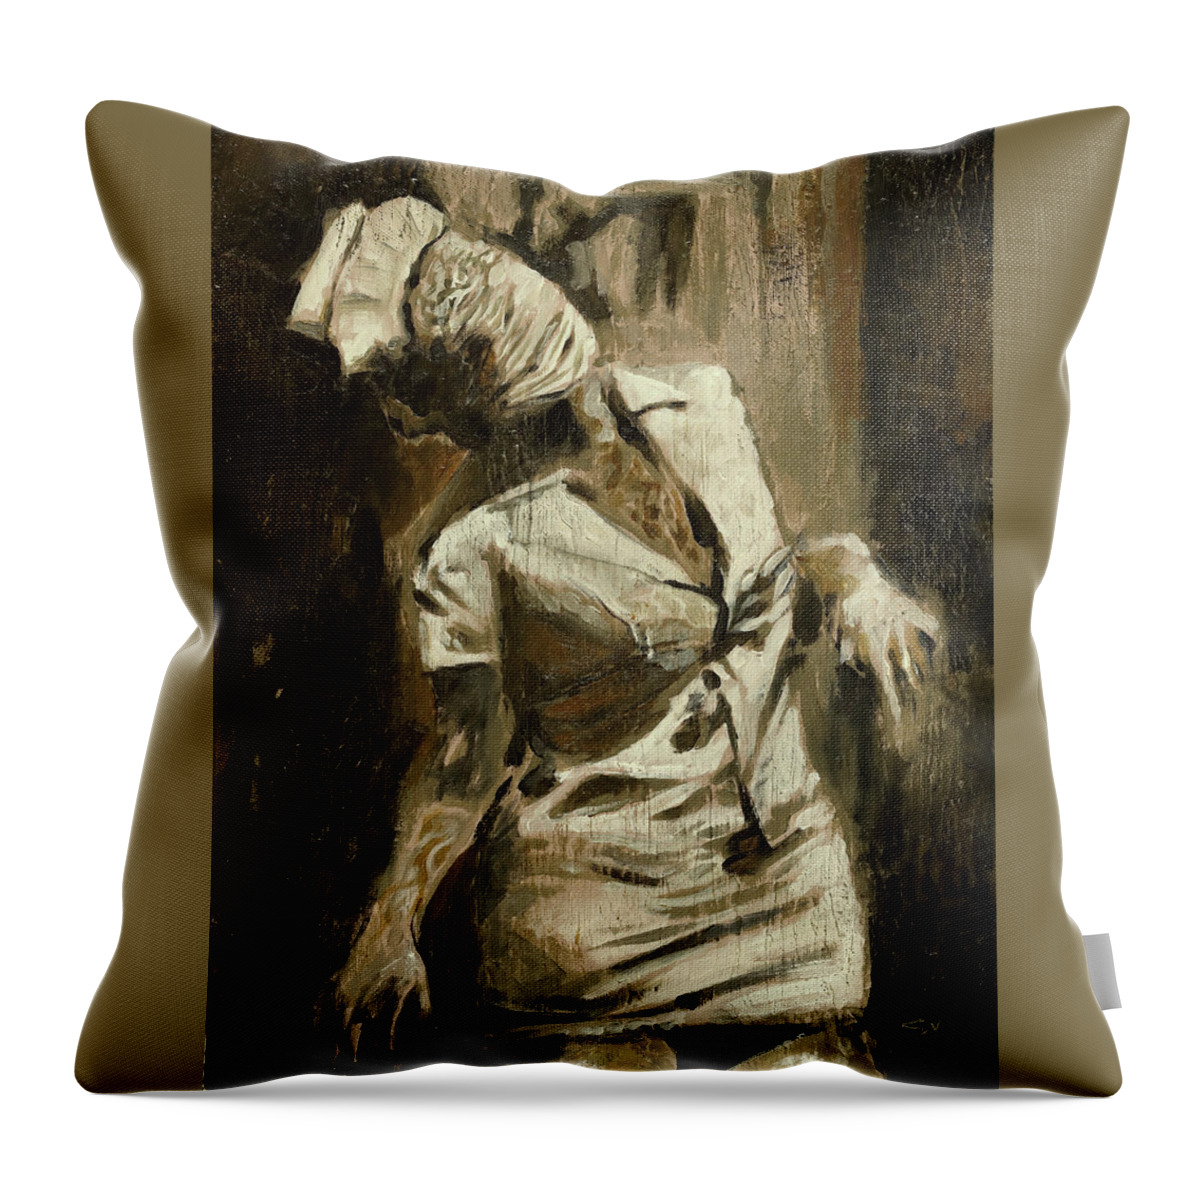 Silent Hill Throw Pillow featuring the painting Silent Hill by Sv Bell